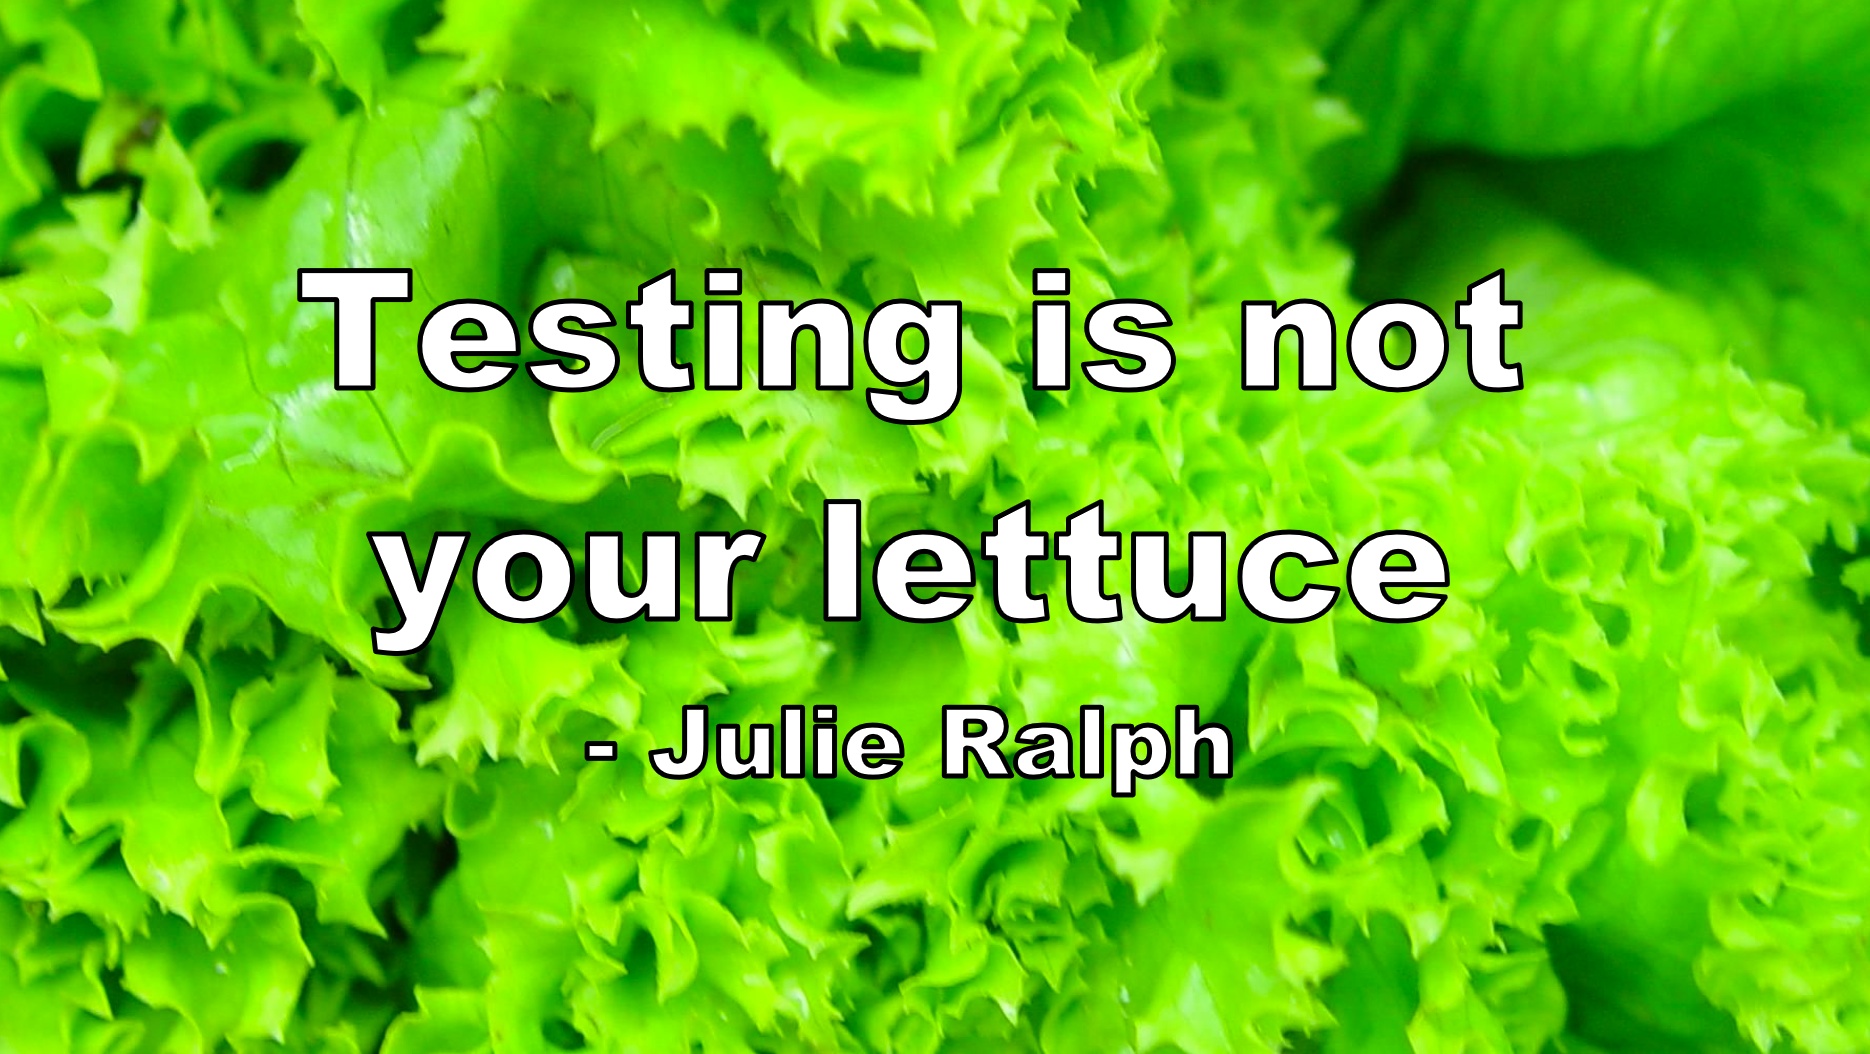 Quote testing is not your lettuce on background of green lettuce